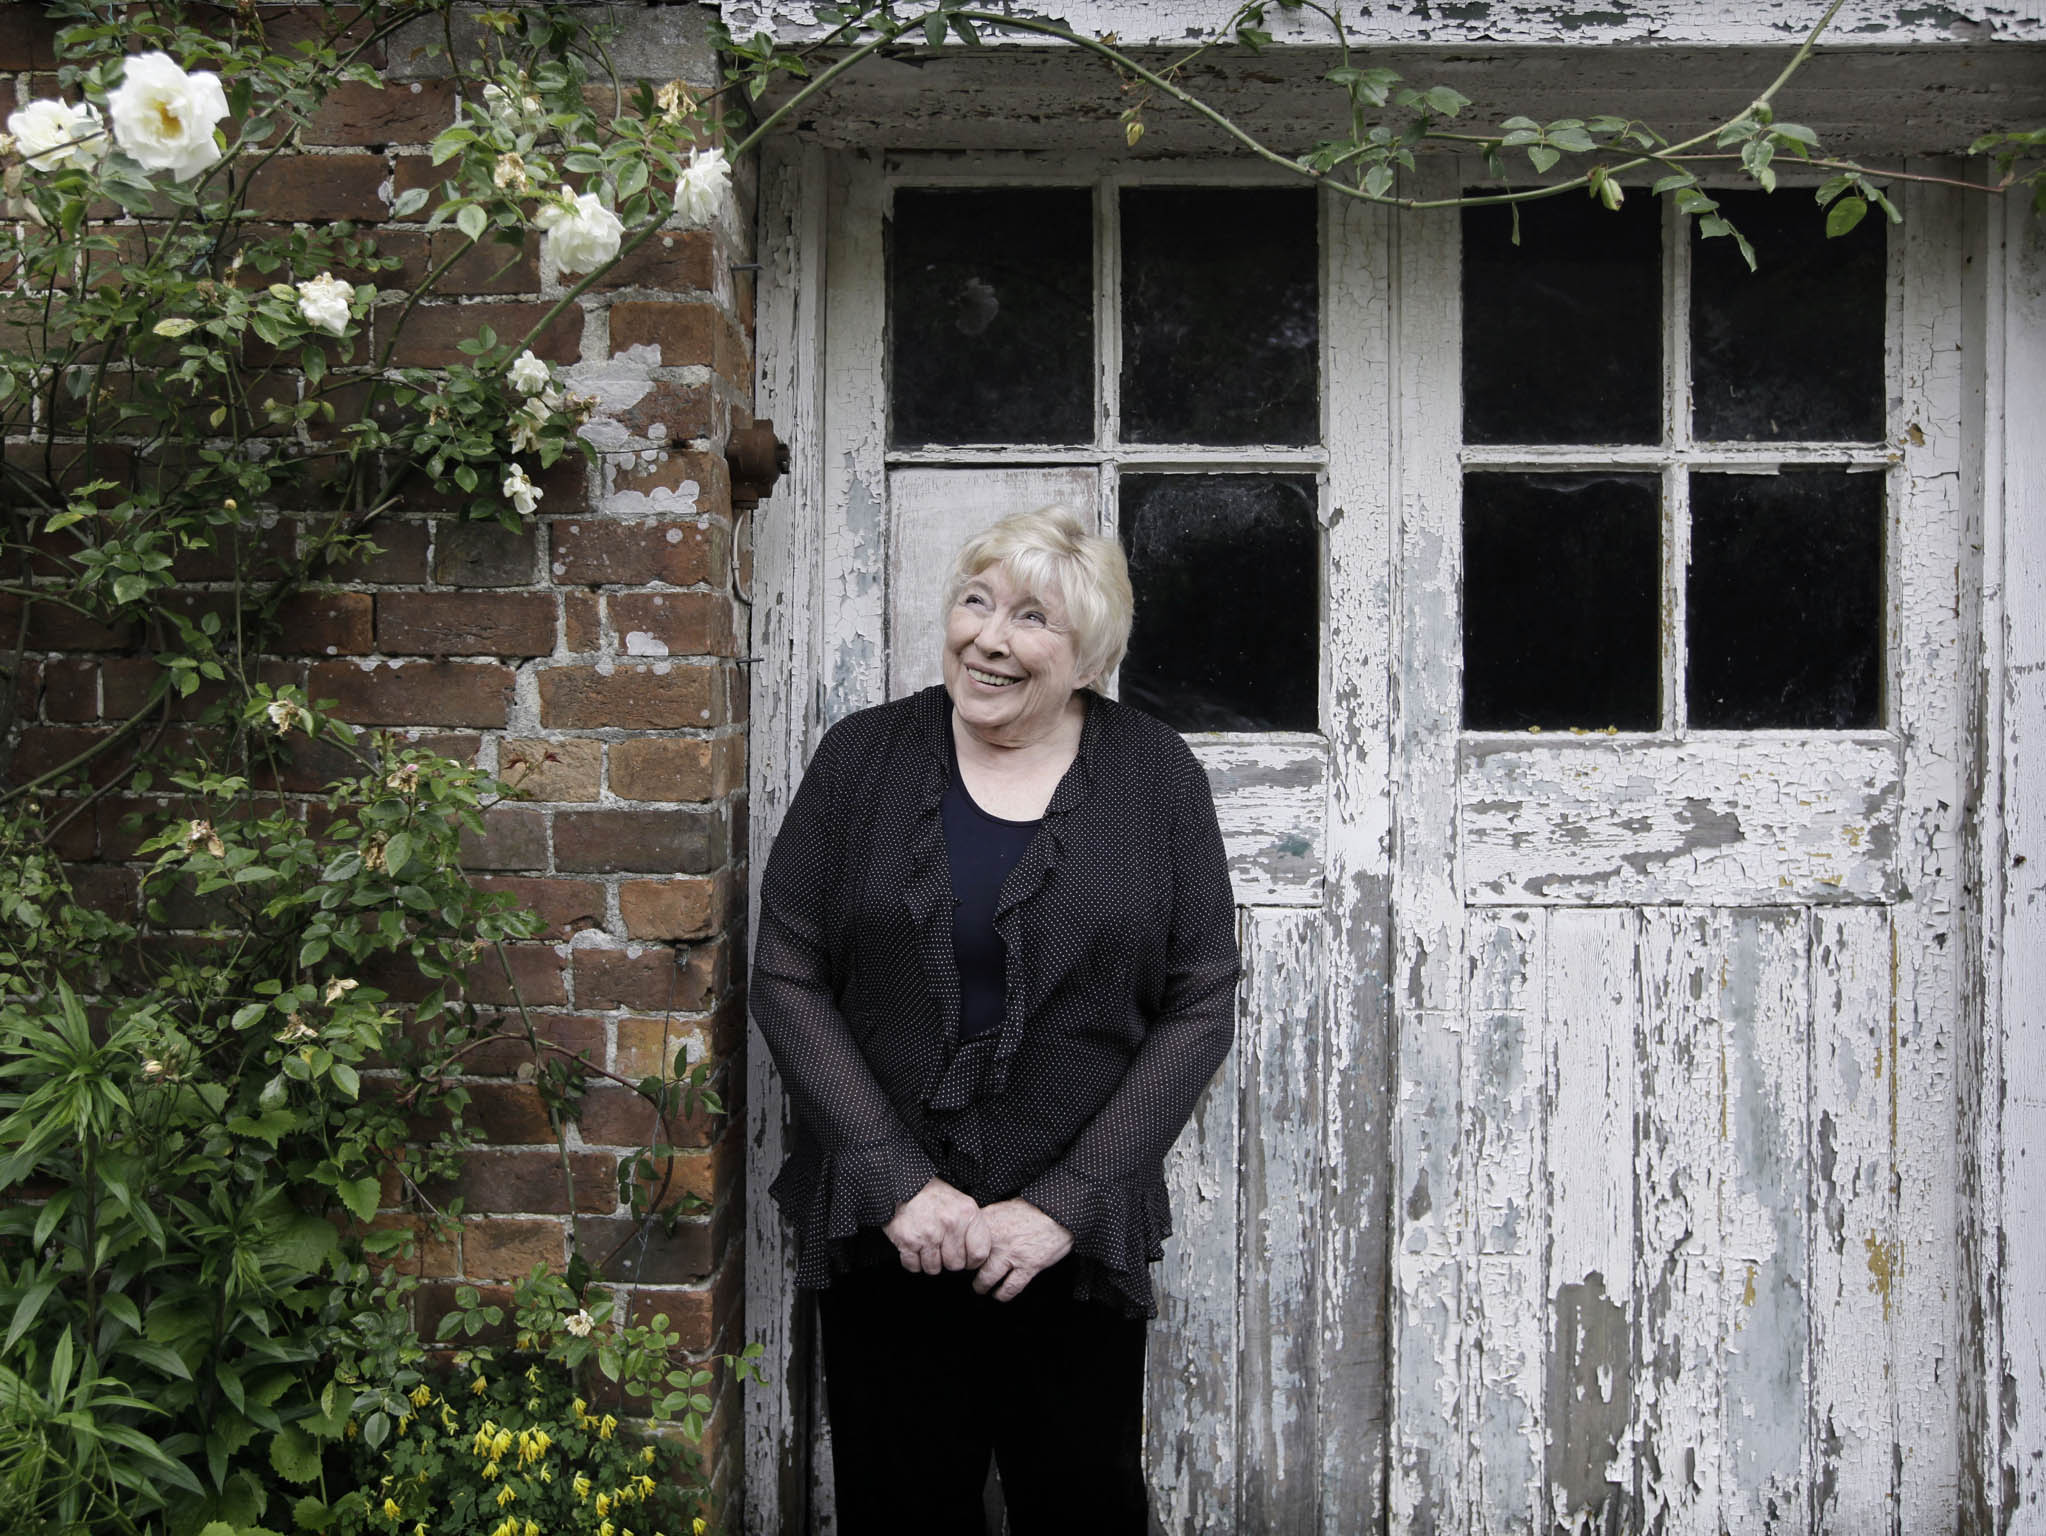 Author Fay Weldon at her home in Shaftesbury, Dorset